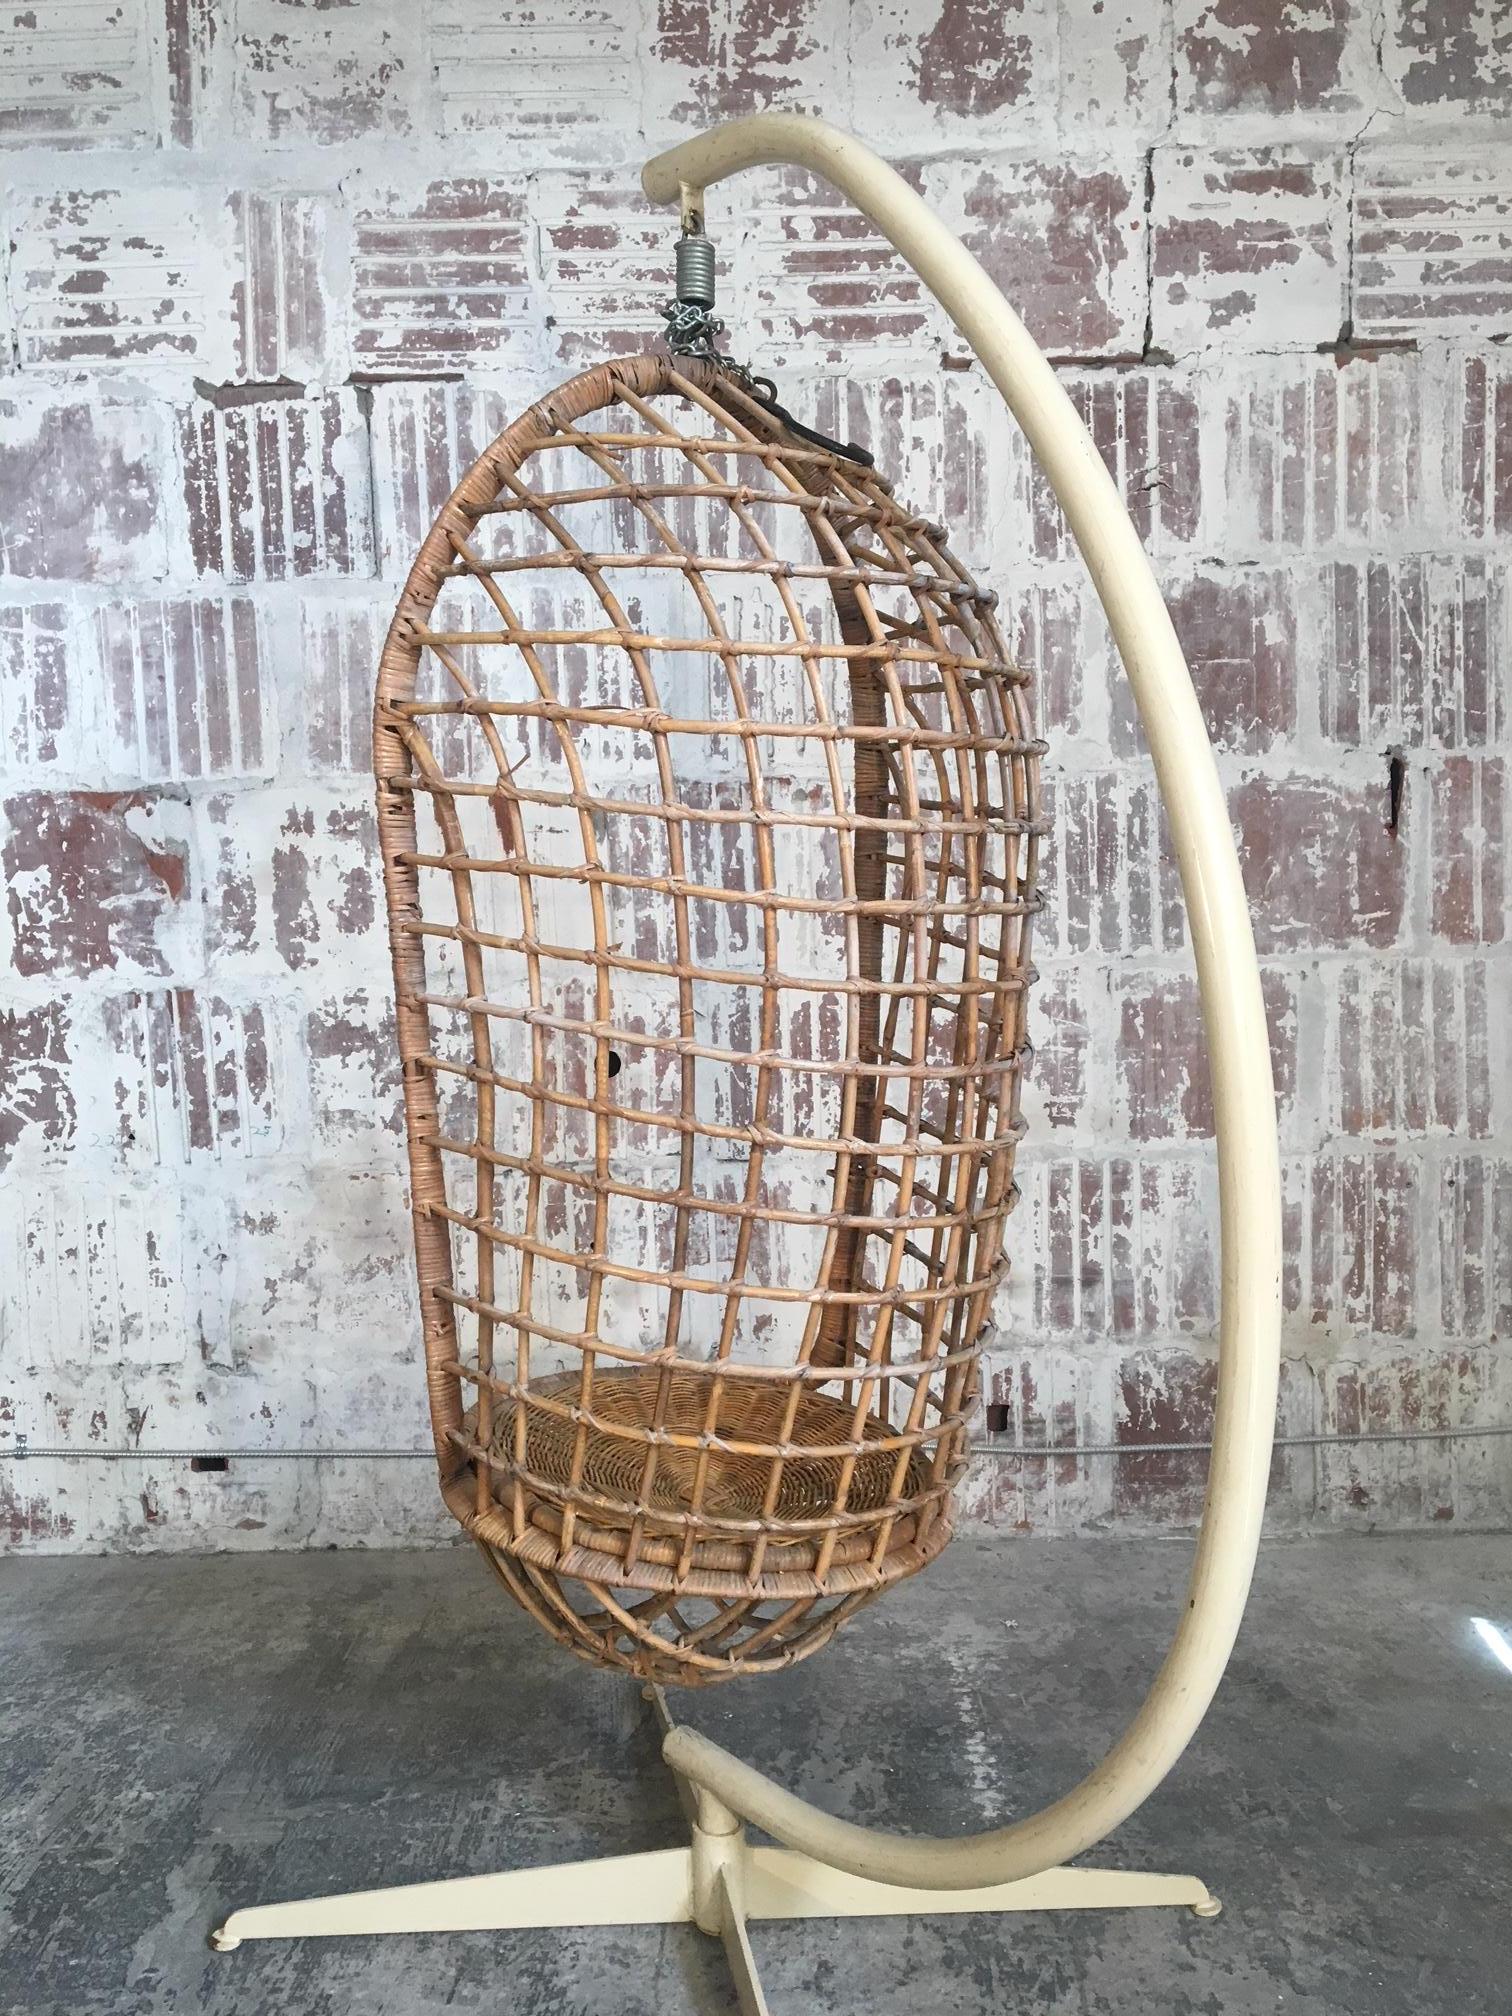 Vintage rattan hanging pod chair includes original steel stand. Also includes attached hook and chain for use without stand. Very good vintage condition with minor age-appropriate wear.
Chair alone measures 17.5